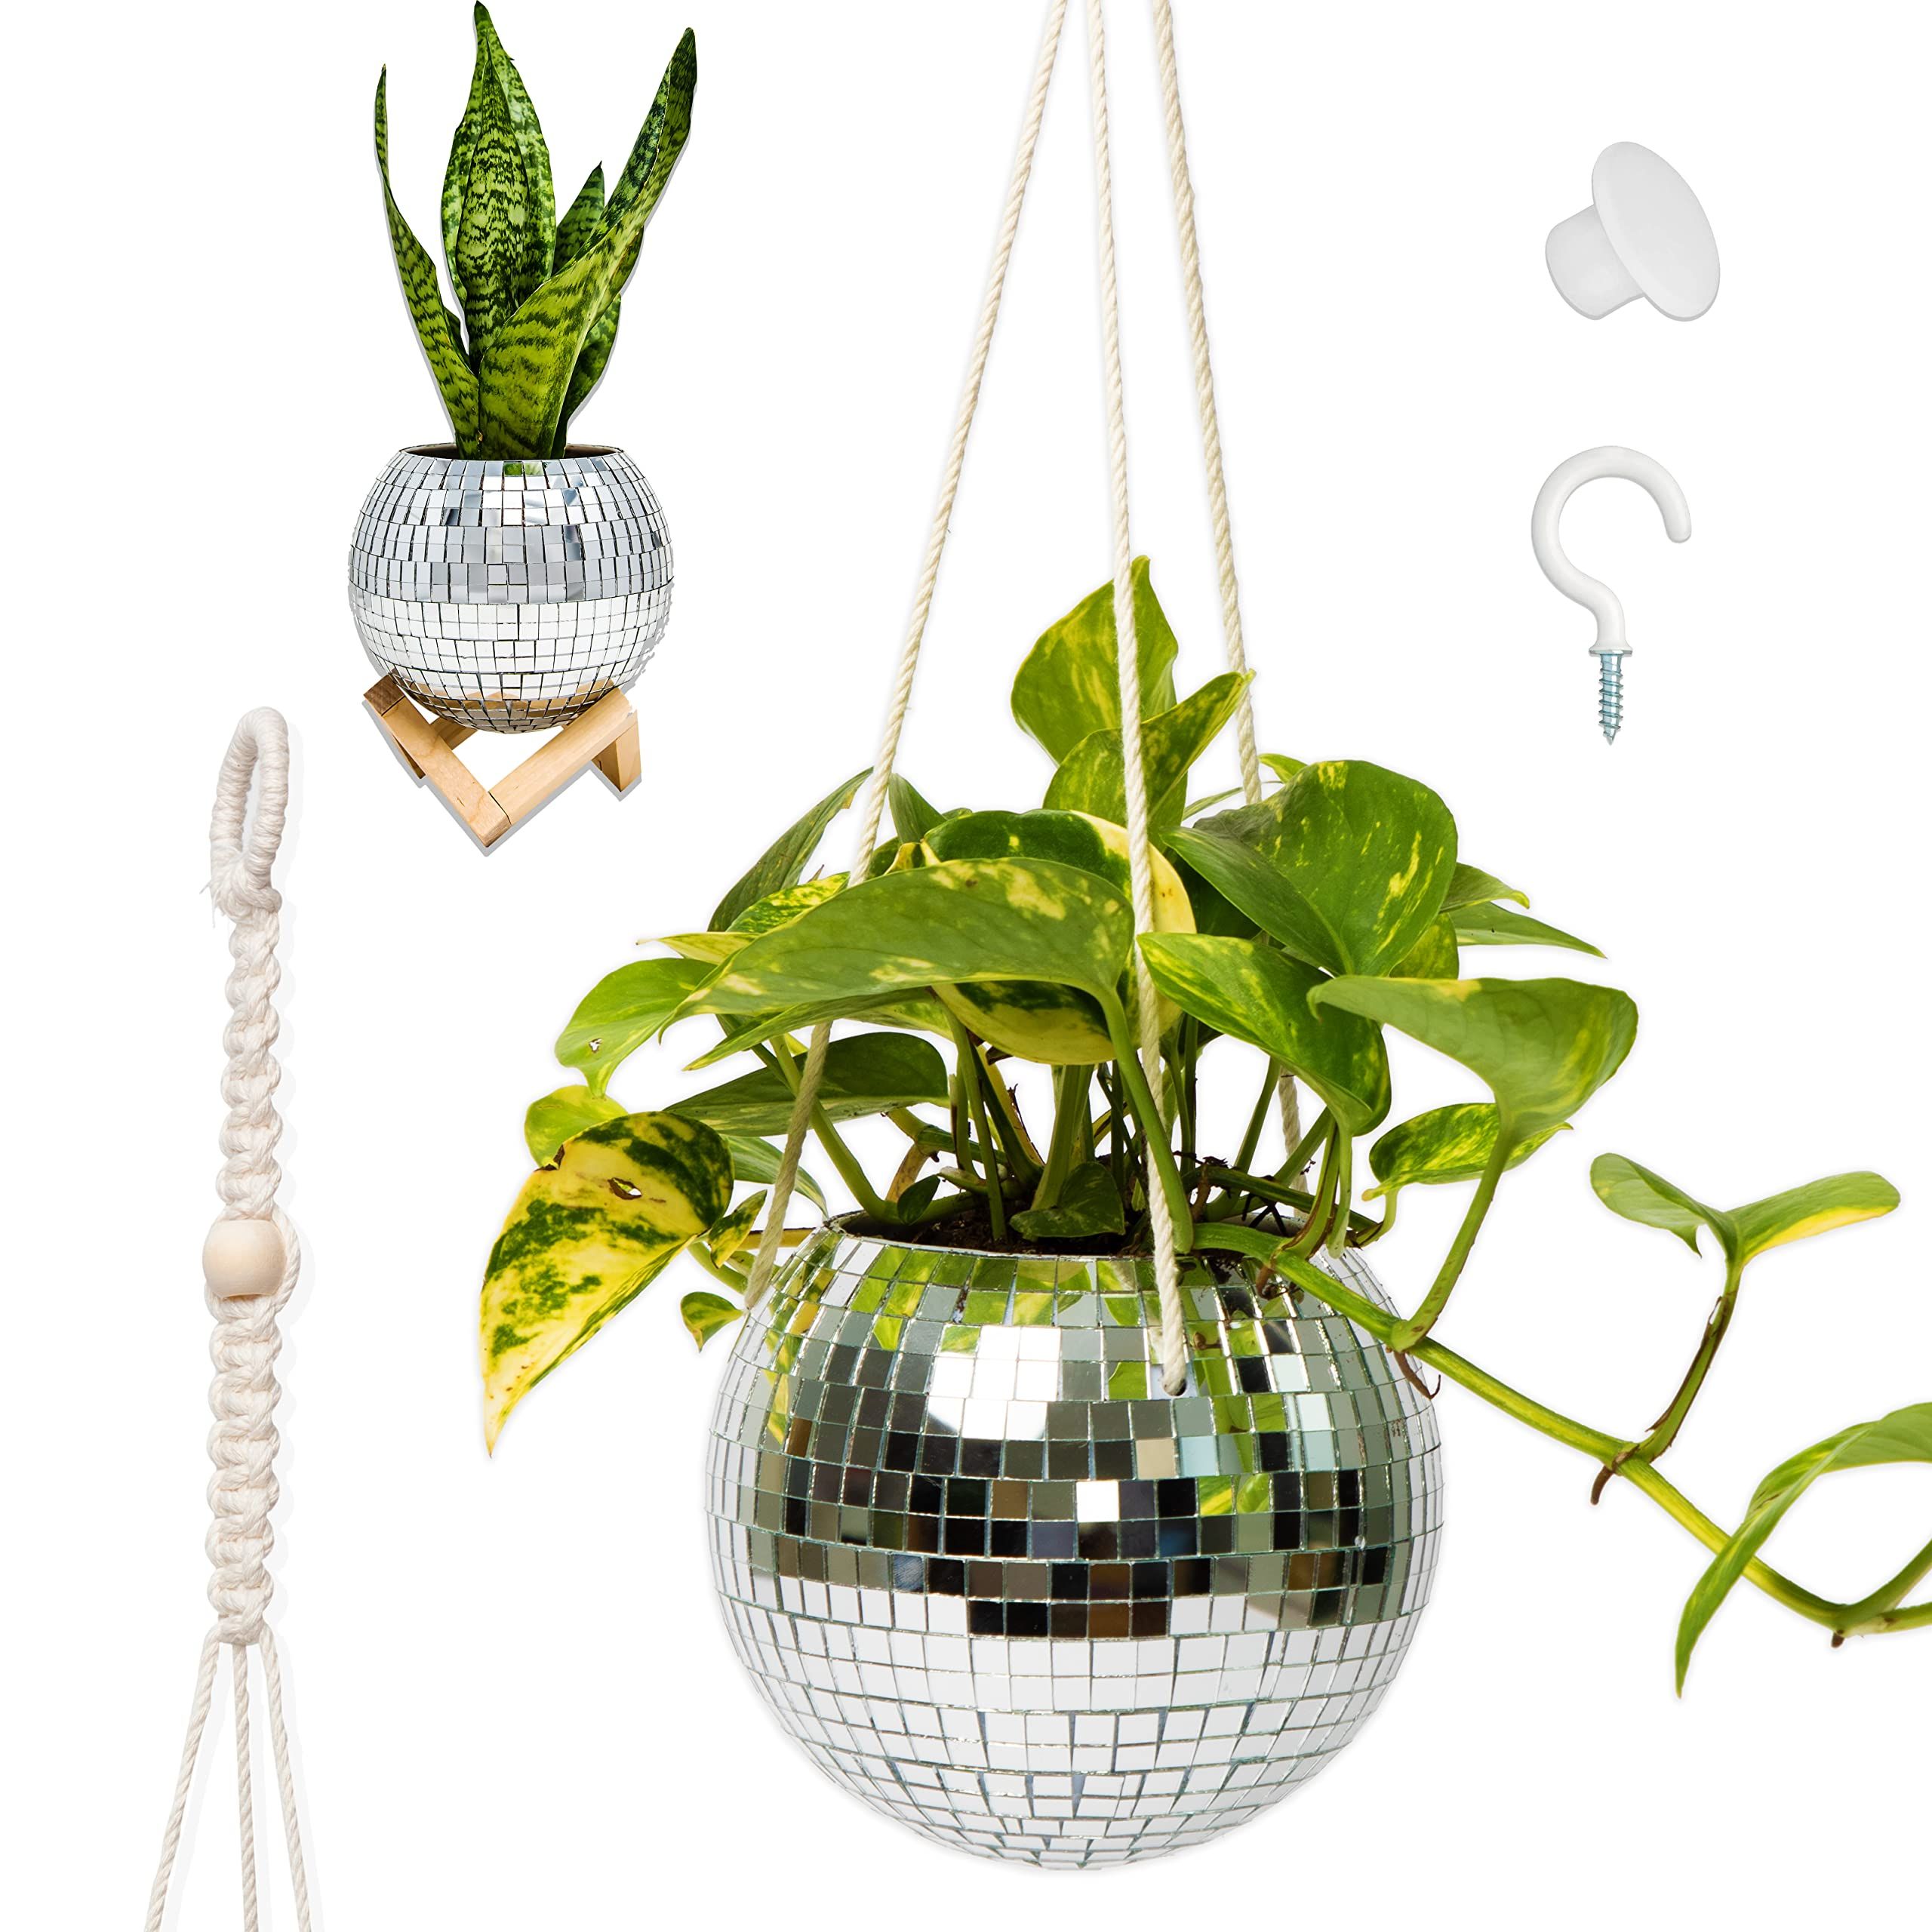 Ball Plant Stands Regarding Well Known Amazon: Lunar Sol – Disco Ball Planter – Disco Ball Plant Hanger With  Macrame Cotton Rope, With Wooden Stand For Desk Planter Decorations With –  Plant Accessories Indoor Or Outdoor Planters For Patio : (View 8 of 10)